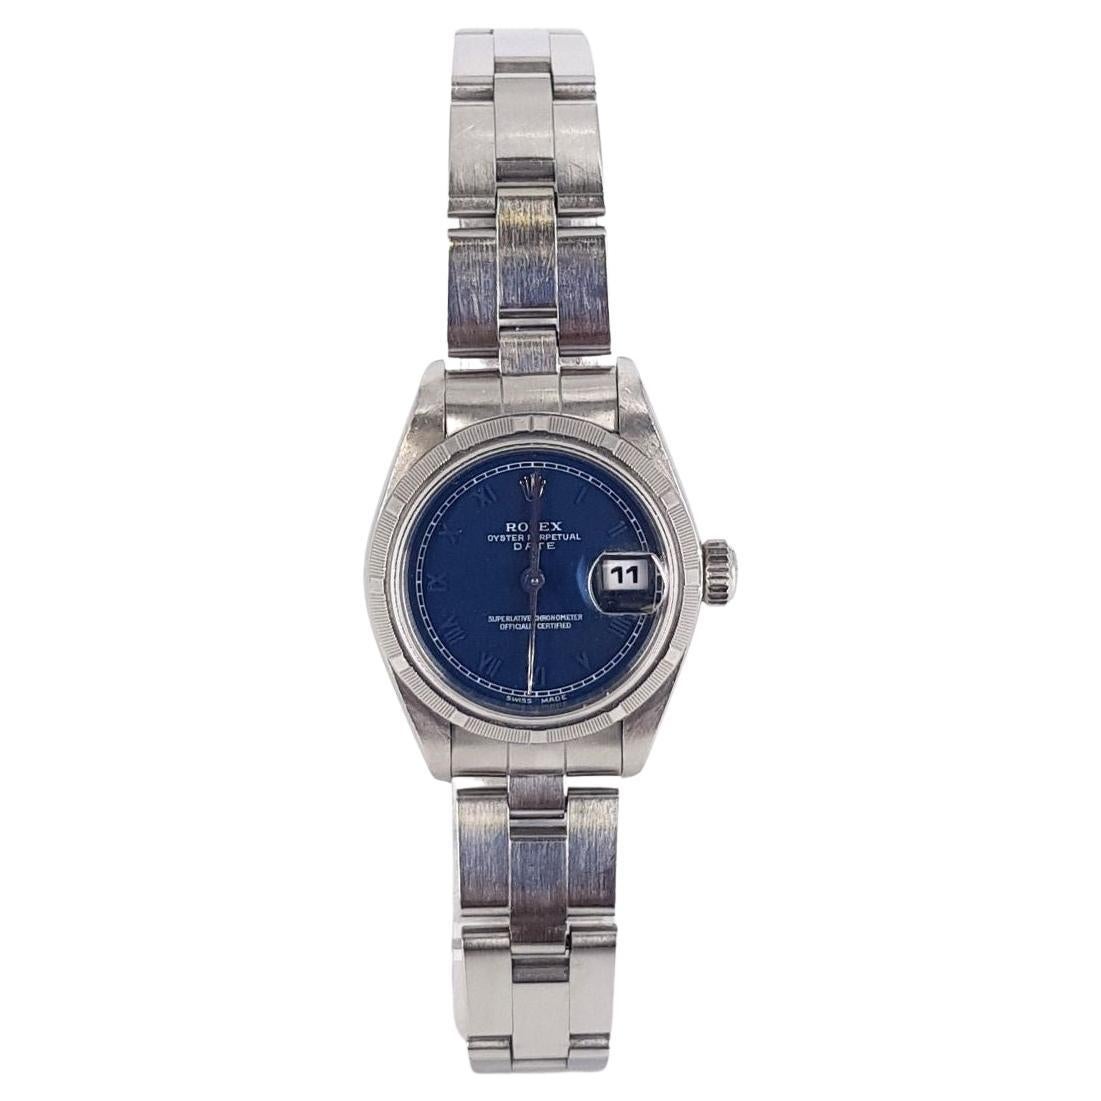 Rolex Oyster Perpetual Date with blue face For Sale